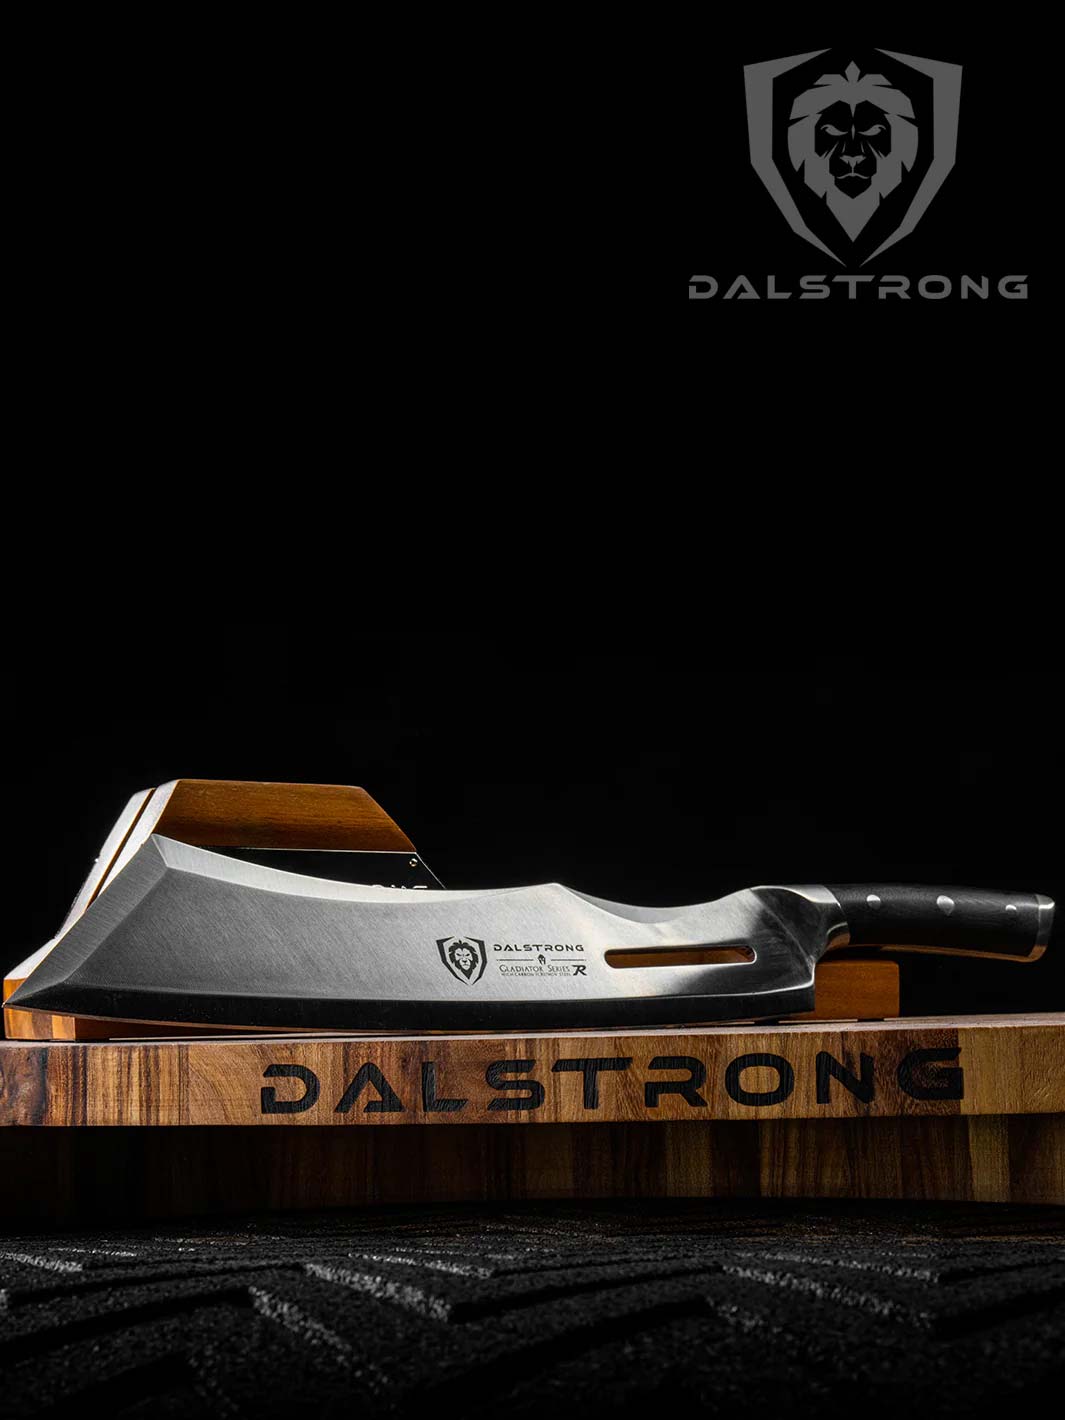 Dalstrong gladiator series 14 inch annihilator cleaver knife with black handle and stand on top of a dalstrong wooden cutting board.